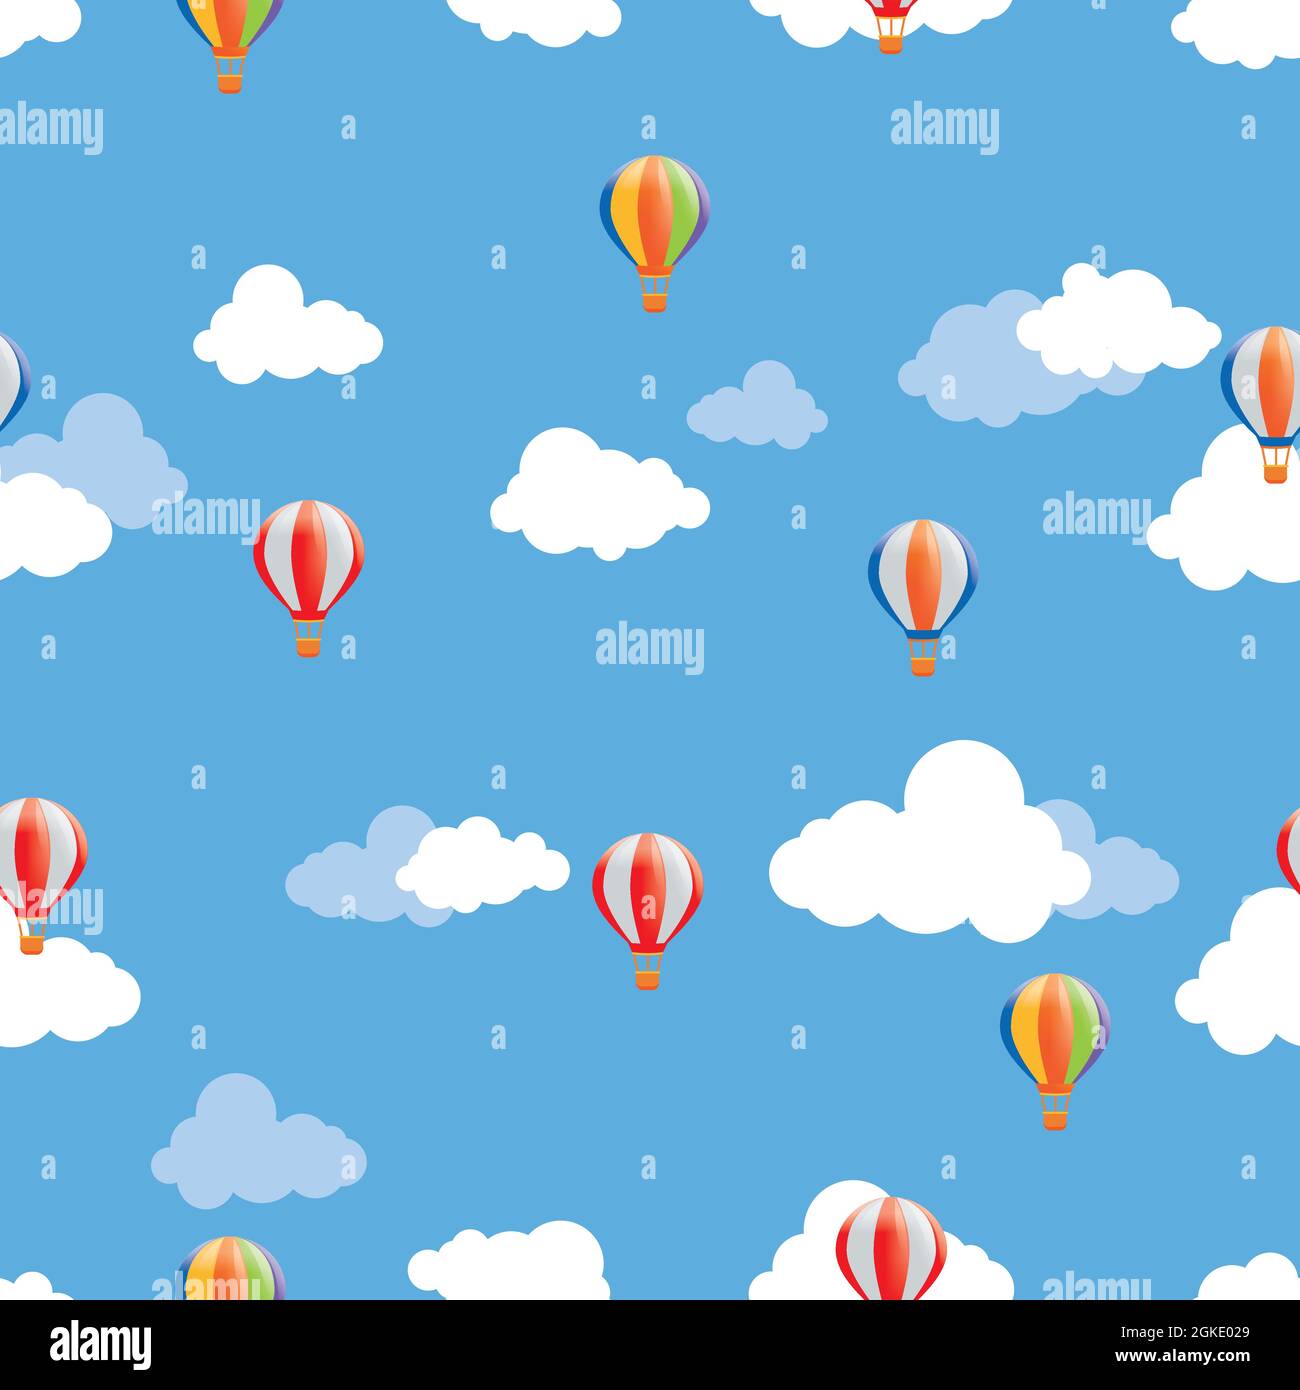 Many cloud Stock Vector Images - Alamy